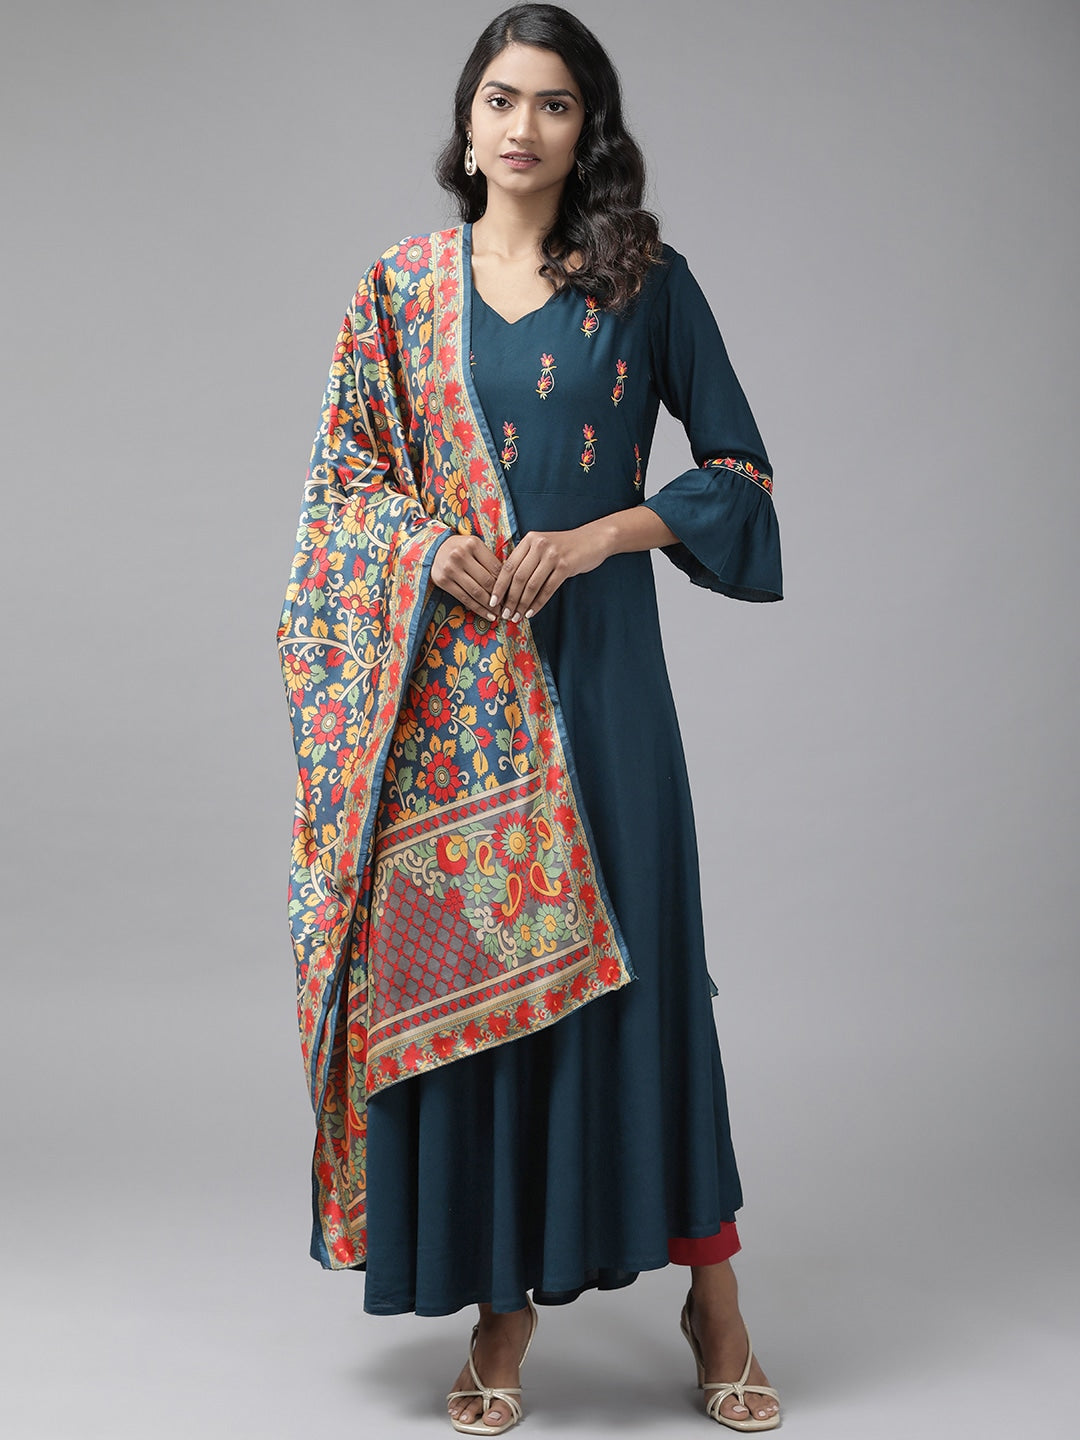 Navy Blue Embroidered Dress with Dupatta-Yufta Store-9430DRSBLS